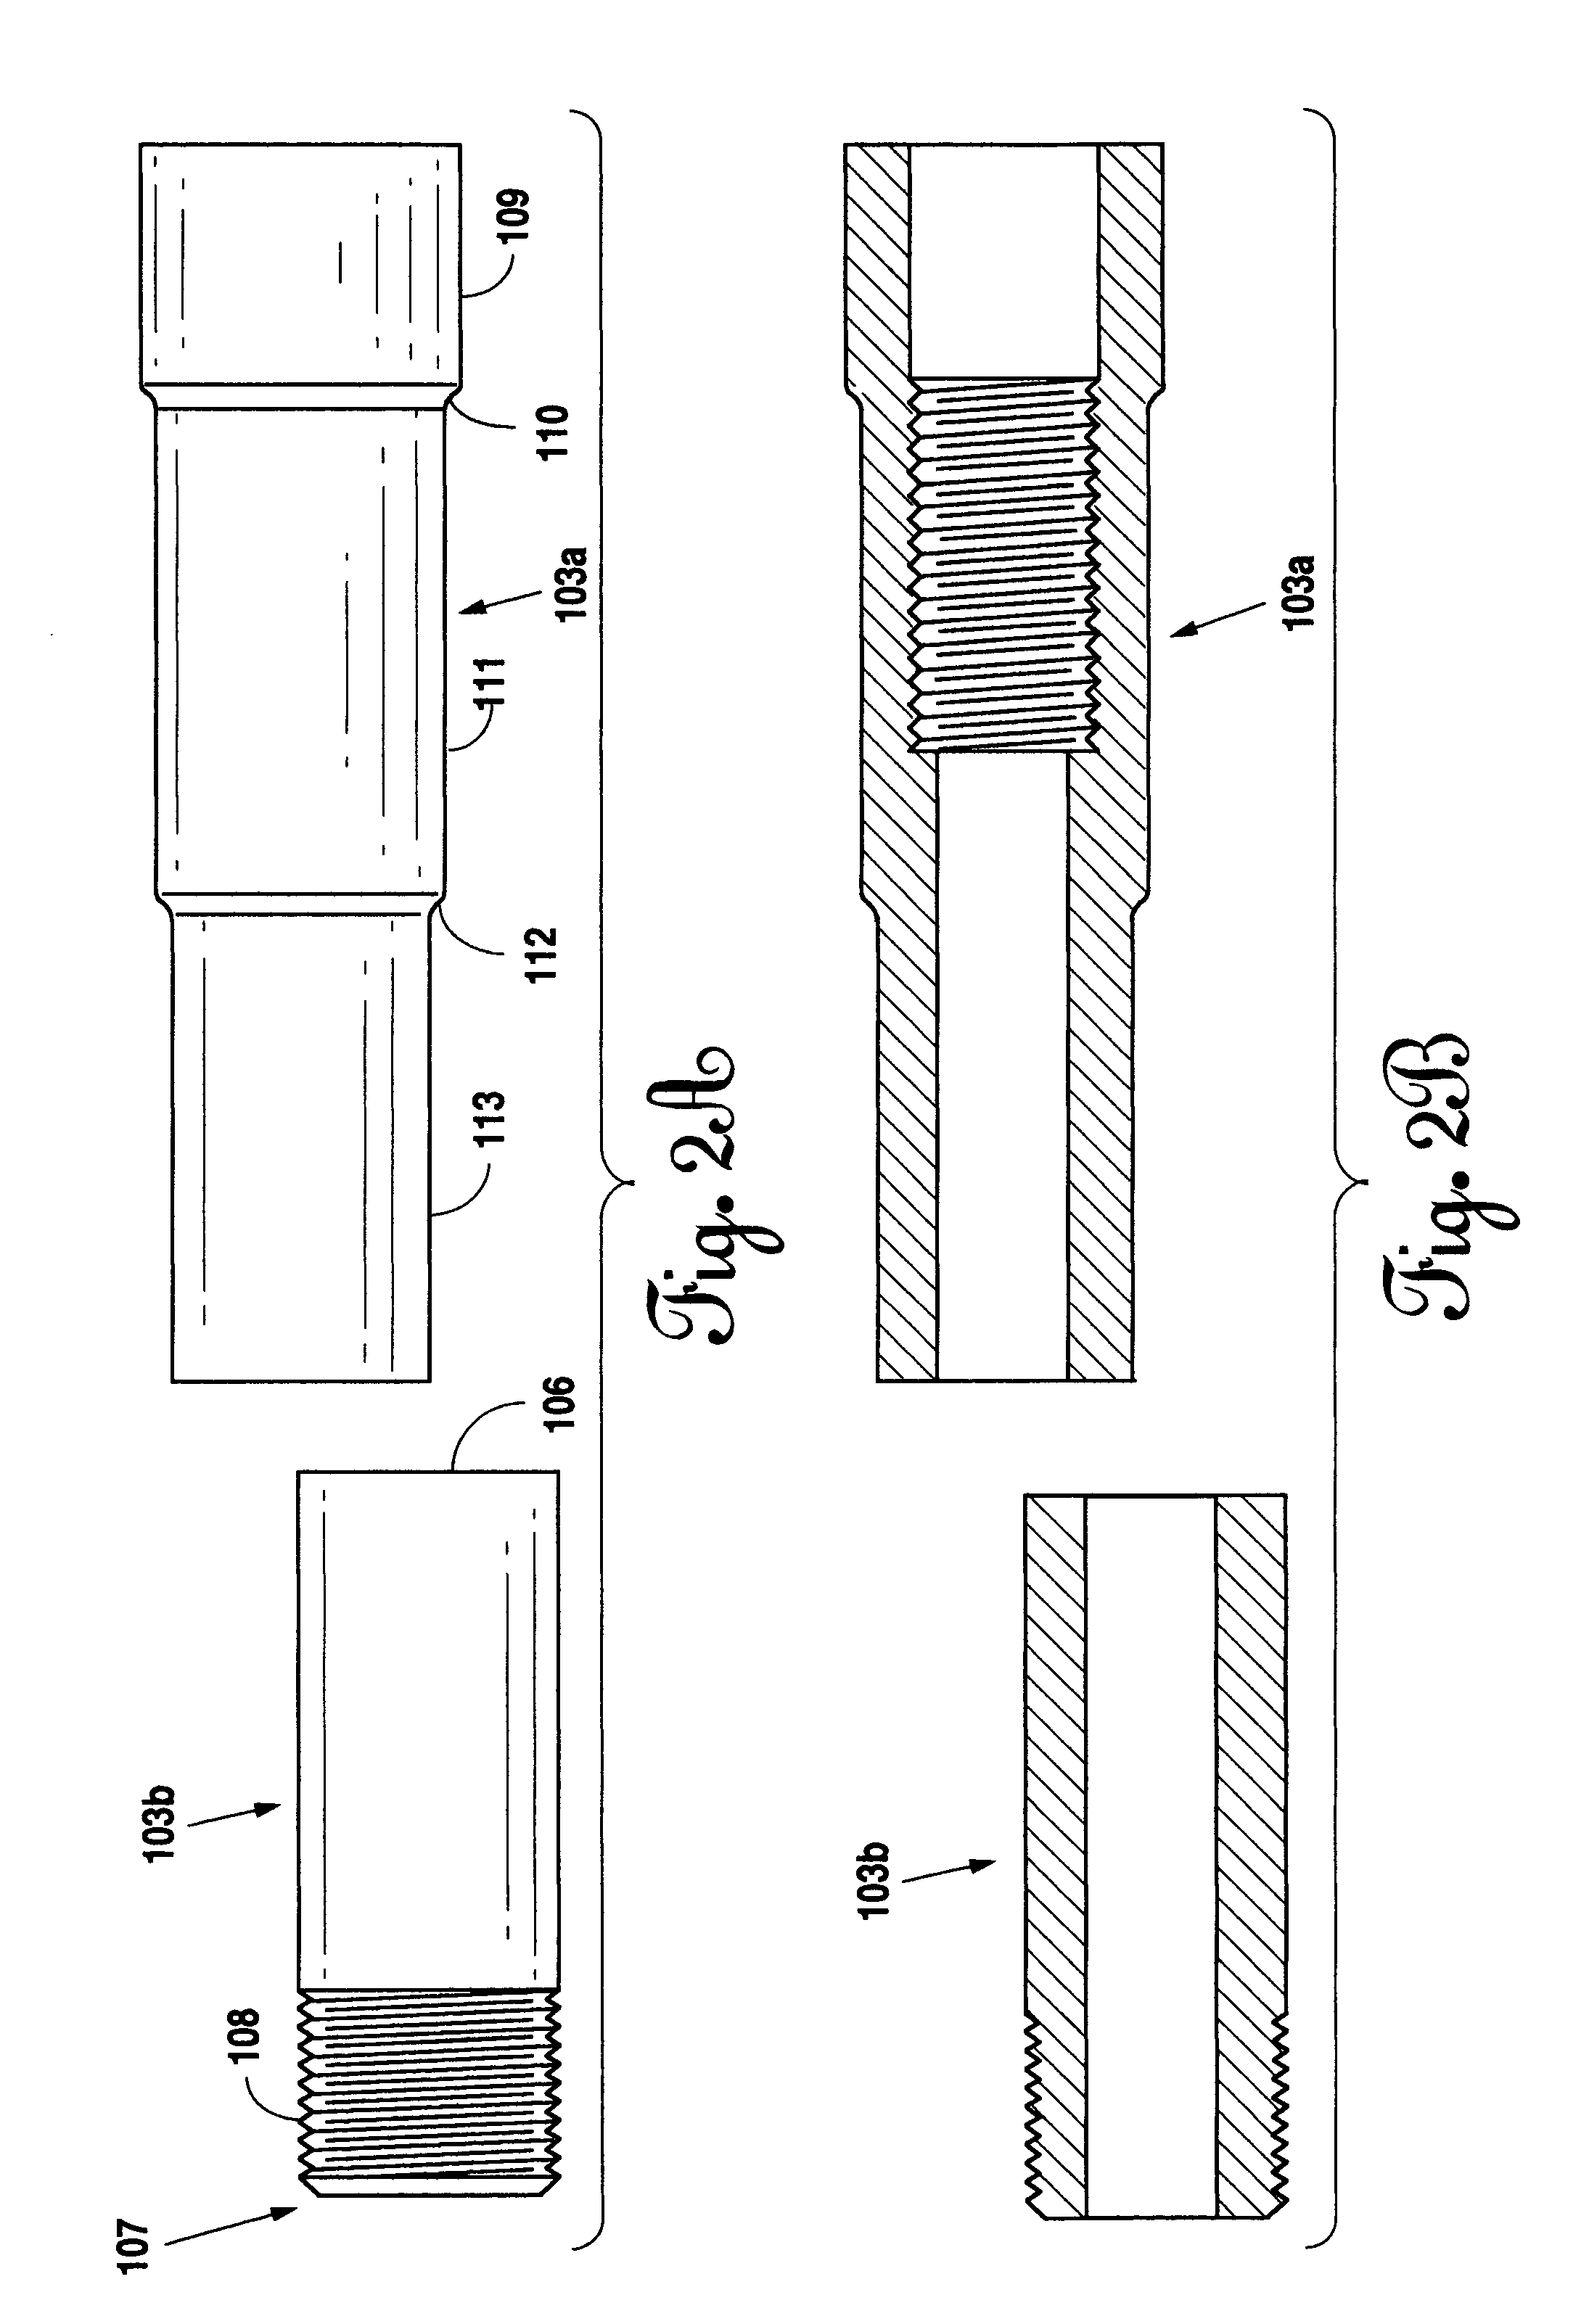 Submersible pump drop pipe and casing assembly connection and method of manufacture